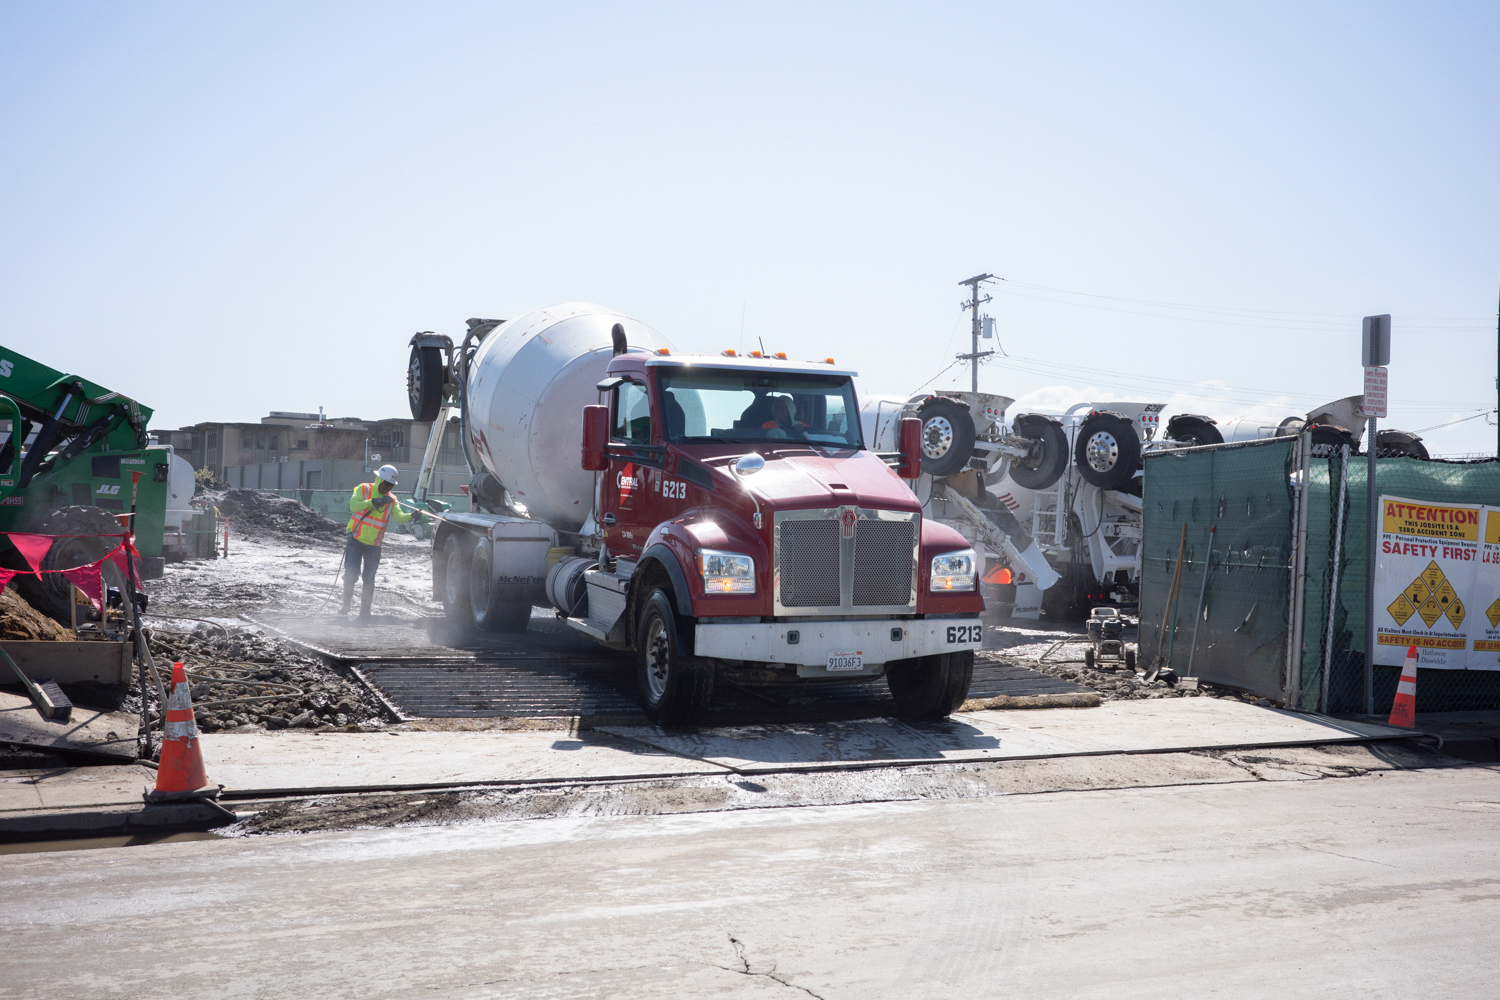 Concrete mixing truck arriving at 1699 Bayshore construction site, image by author